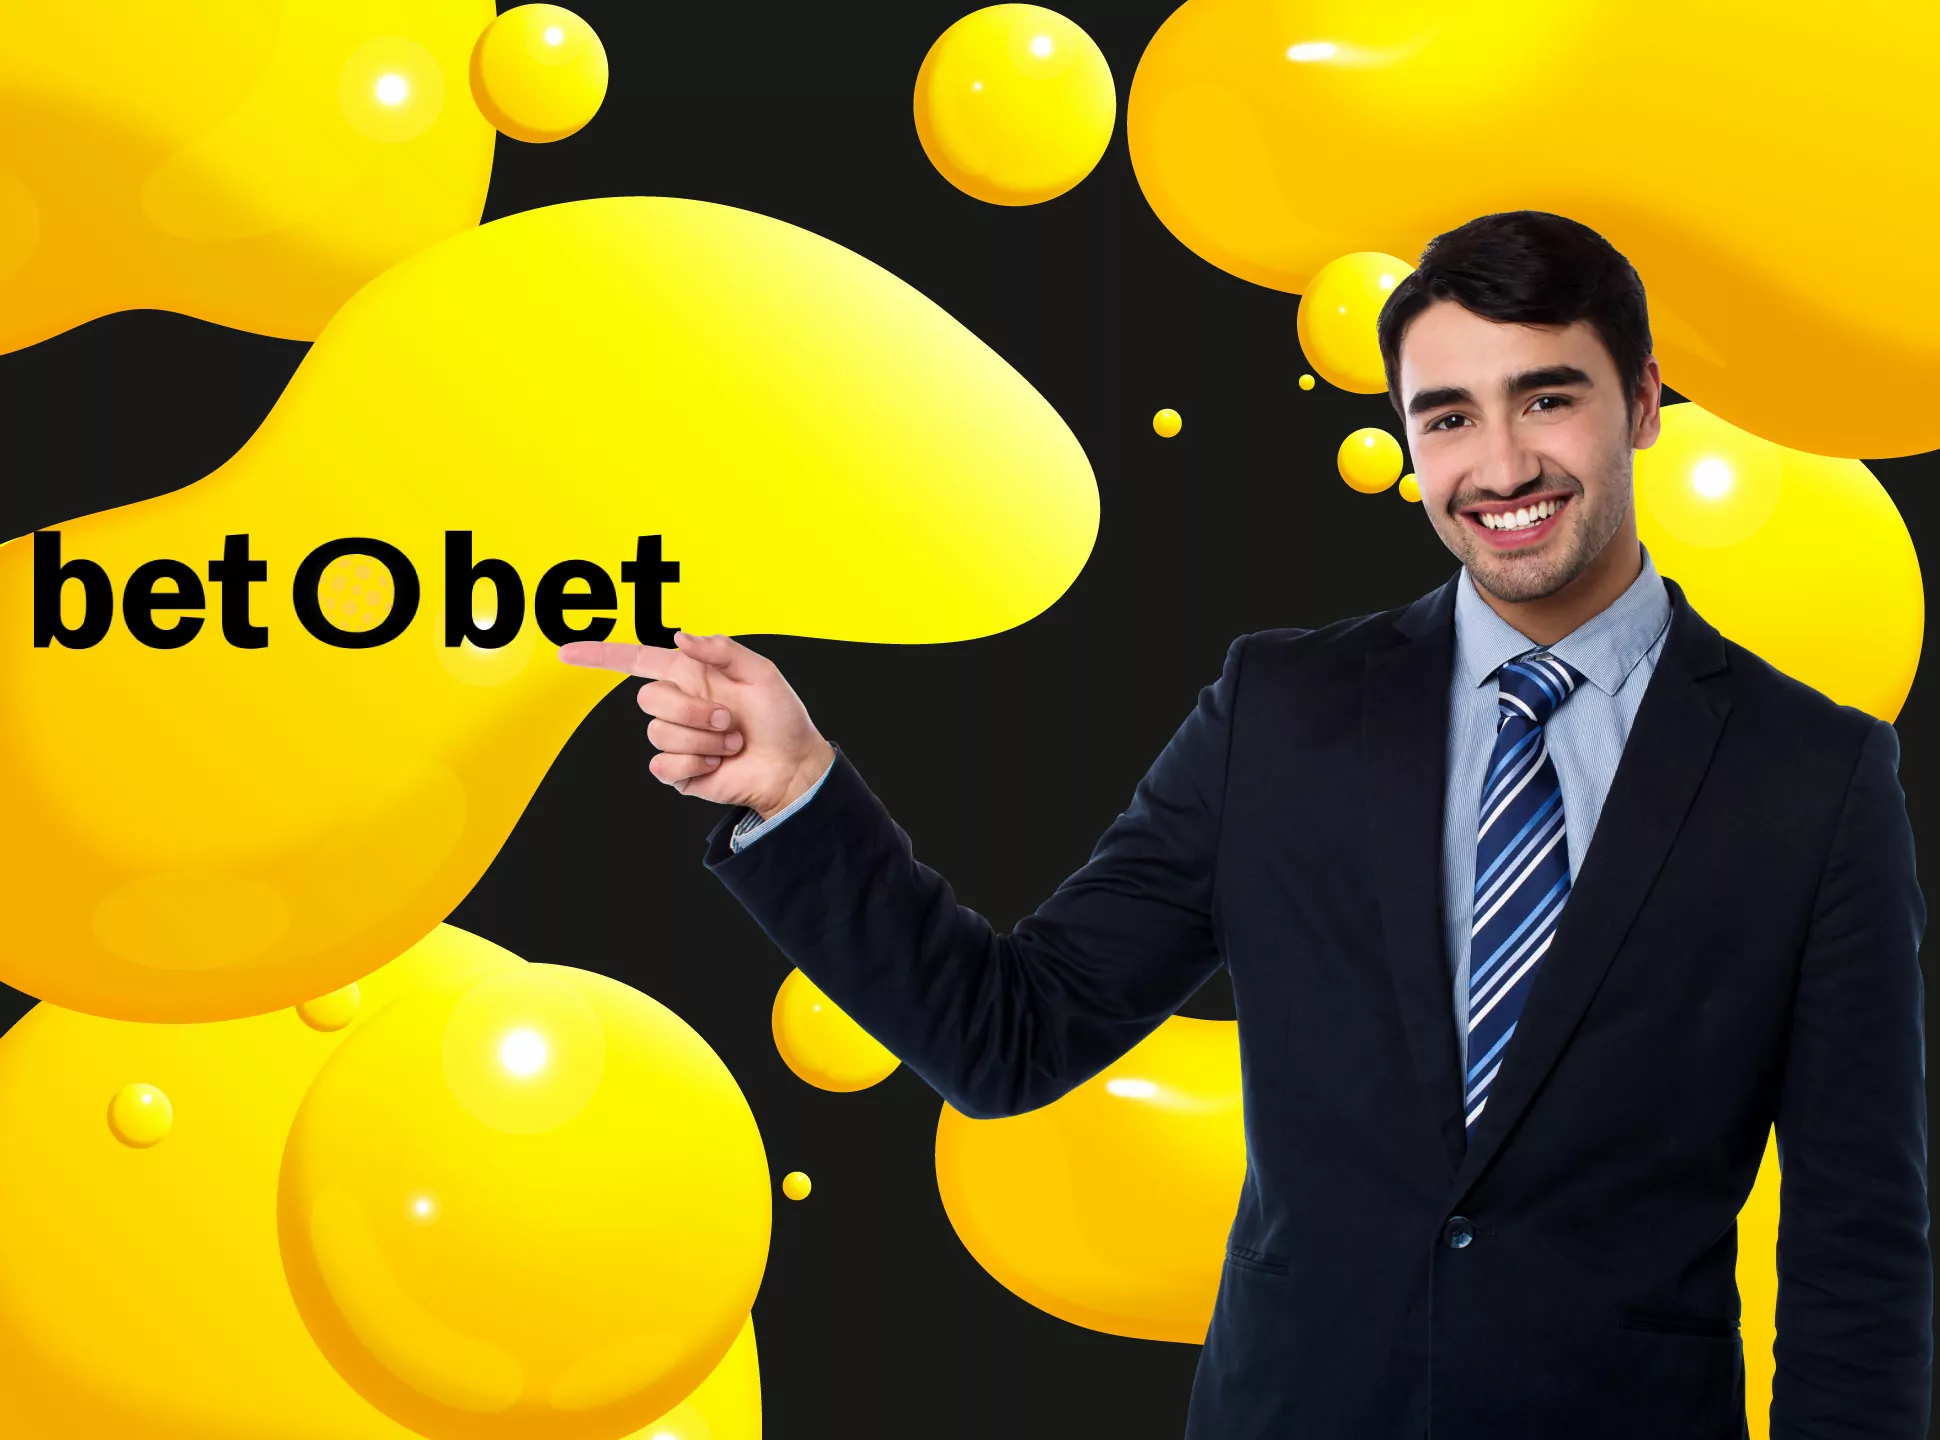 Betobet app is a great way to play casino games an any moment.